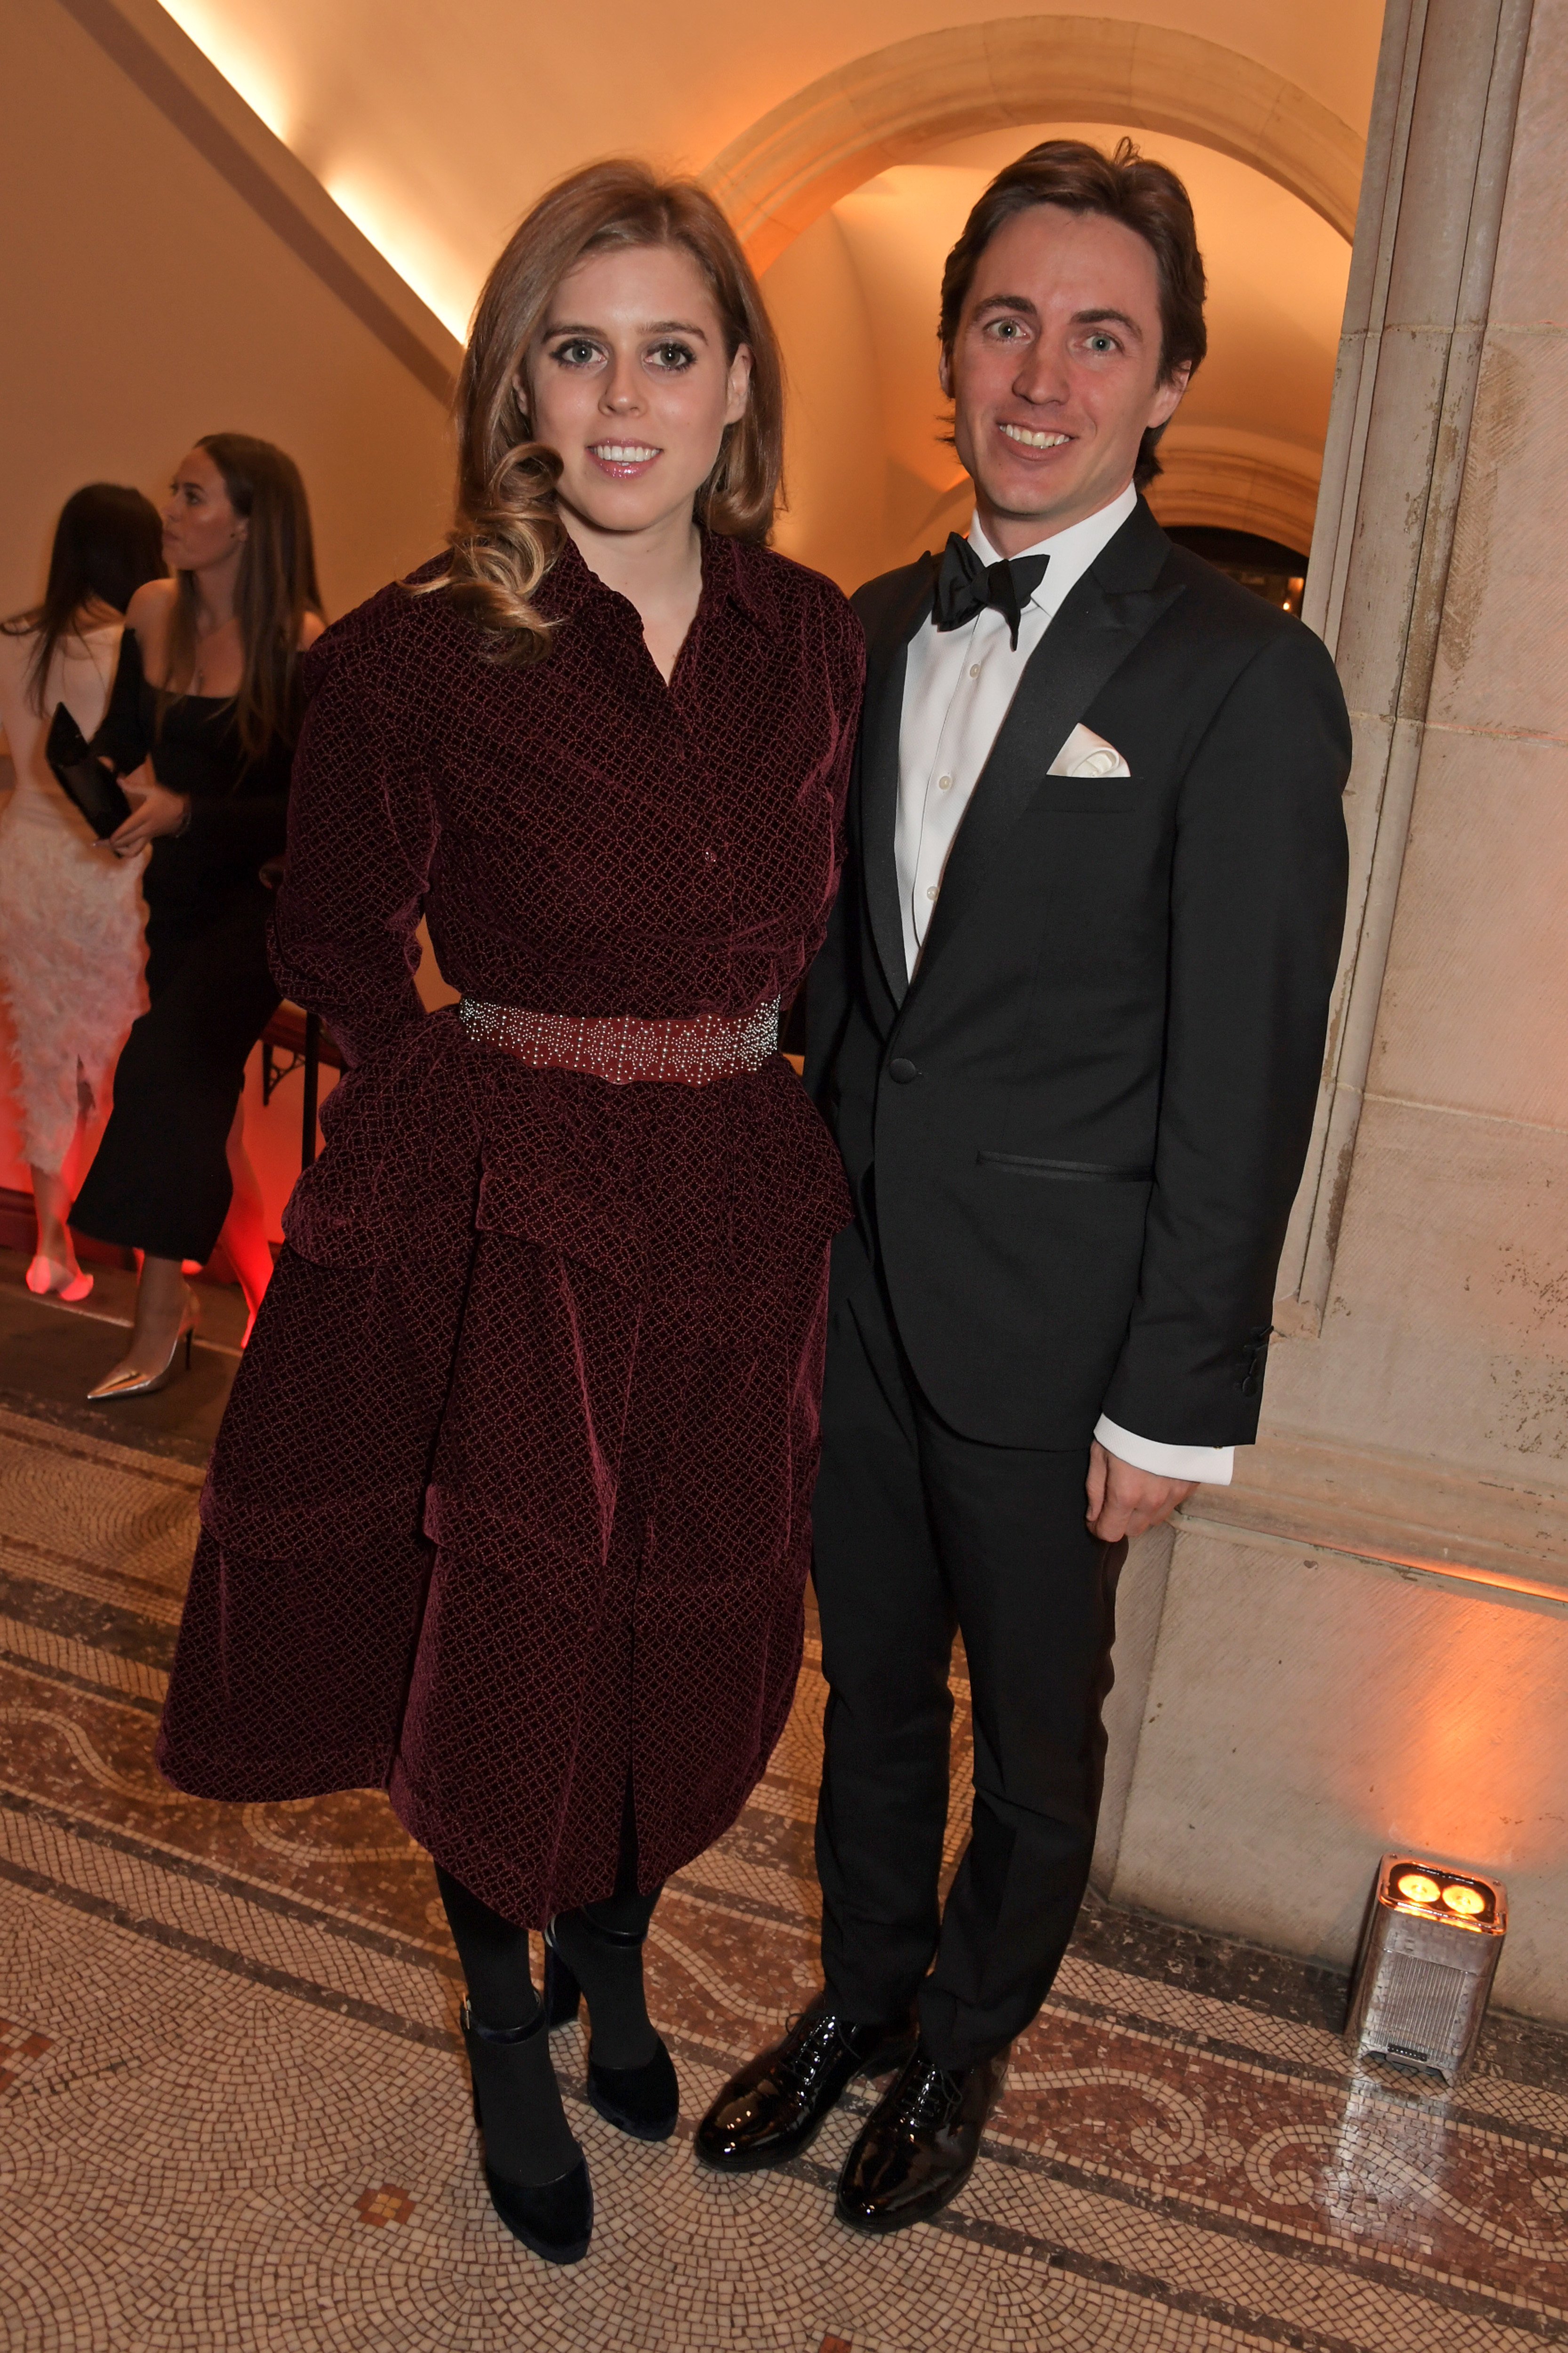 Princess Beatrice and Edoardo Mozzi at London's National Portrait Gallery in March 2019. | Photo: Getty Images